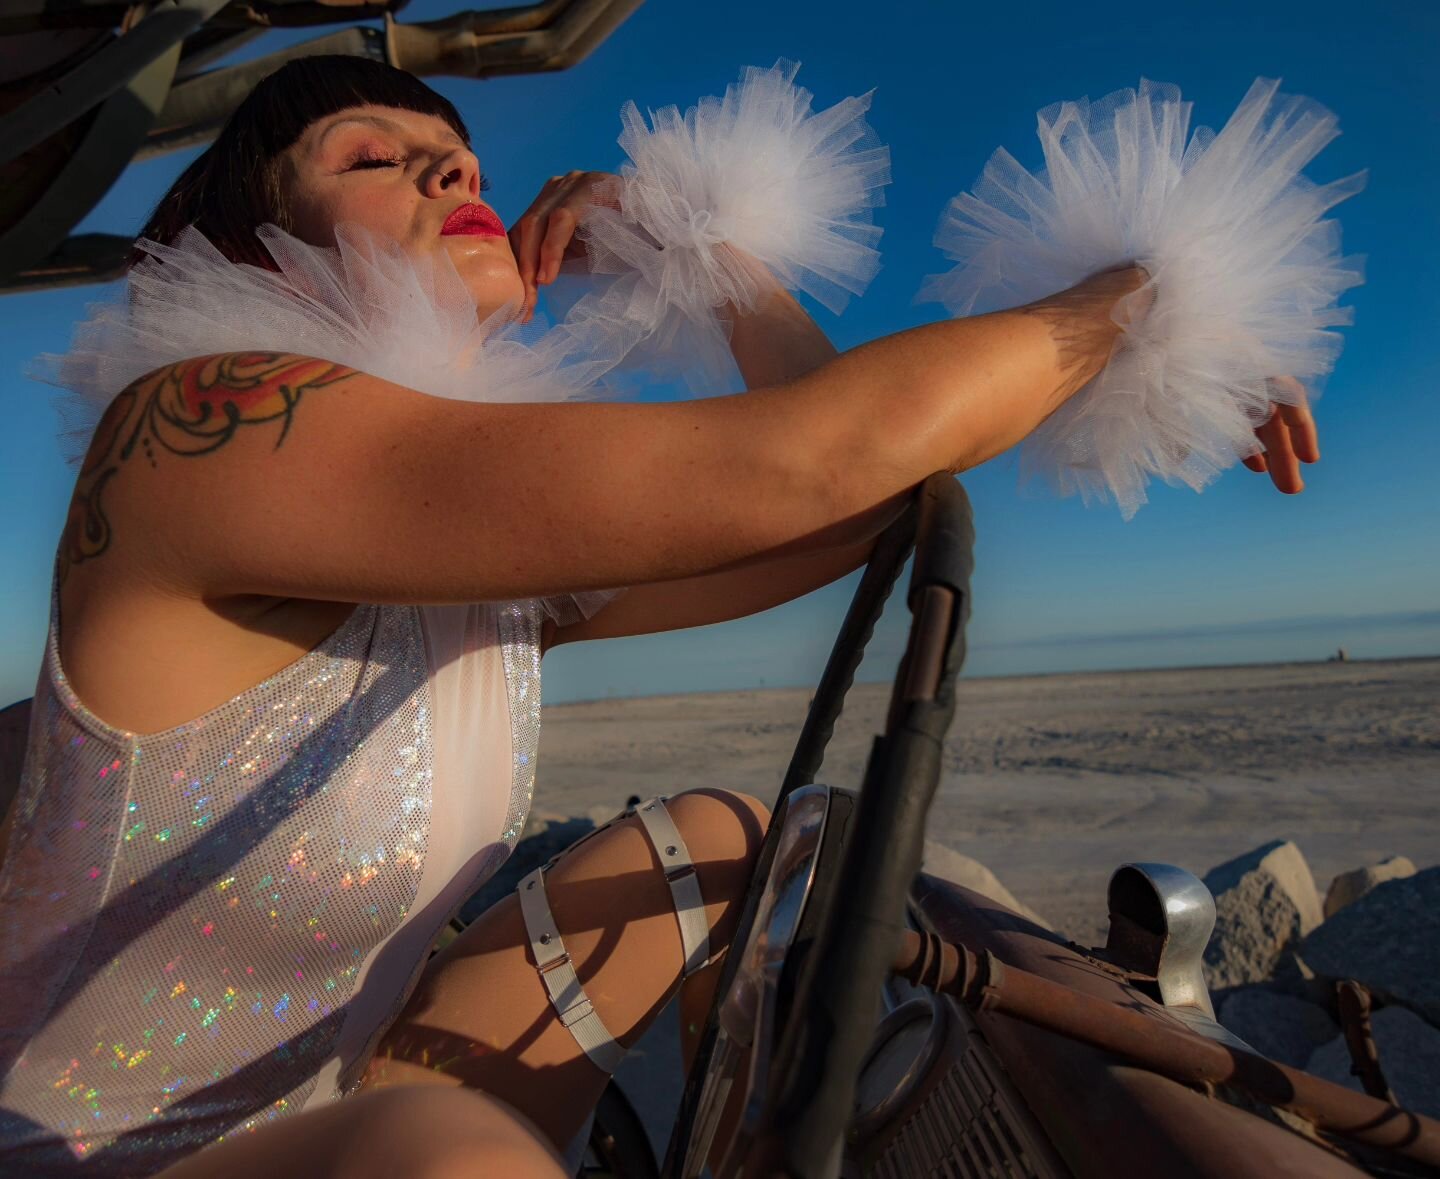 &quot;Life was a wheel, its only job was to turn, and it always came back to where it started.&quot; - Stephen King

📷: @adam.negrete
-
-
-
-
-
-
-
-
-
-
-
-
-
-
#saltonsea #clowngirl #circuscouture #circusinspiration #glamour #bombaybeach #circus #